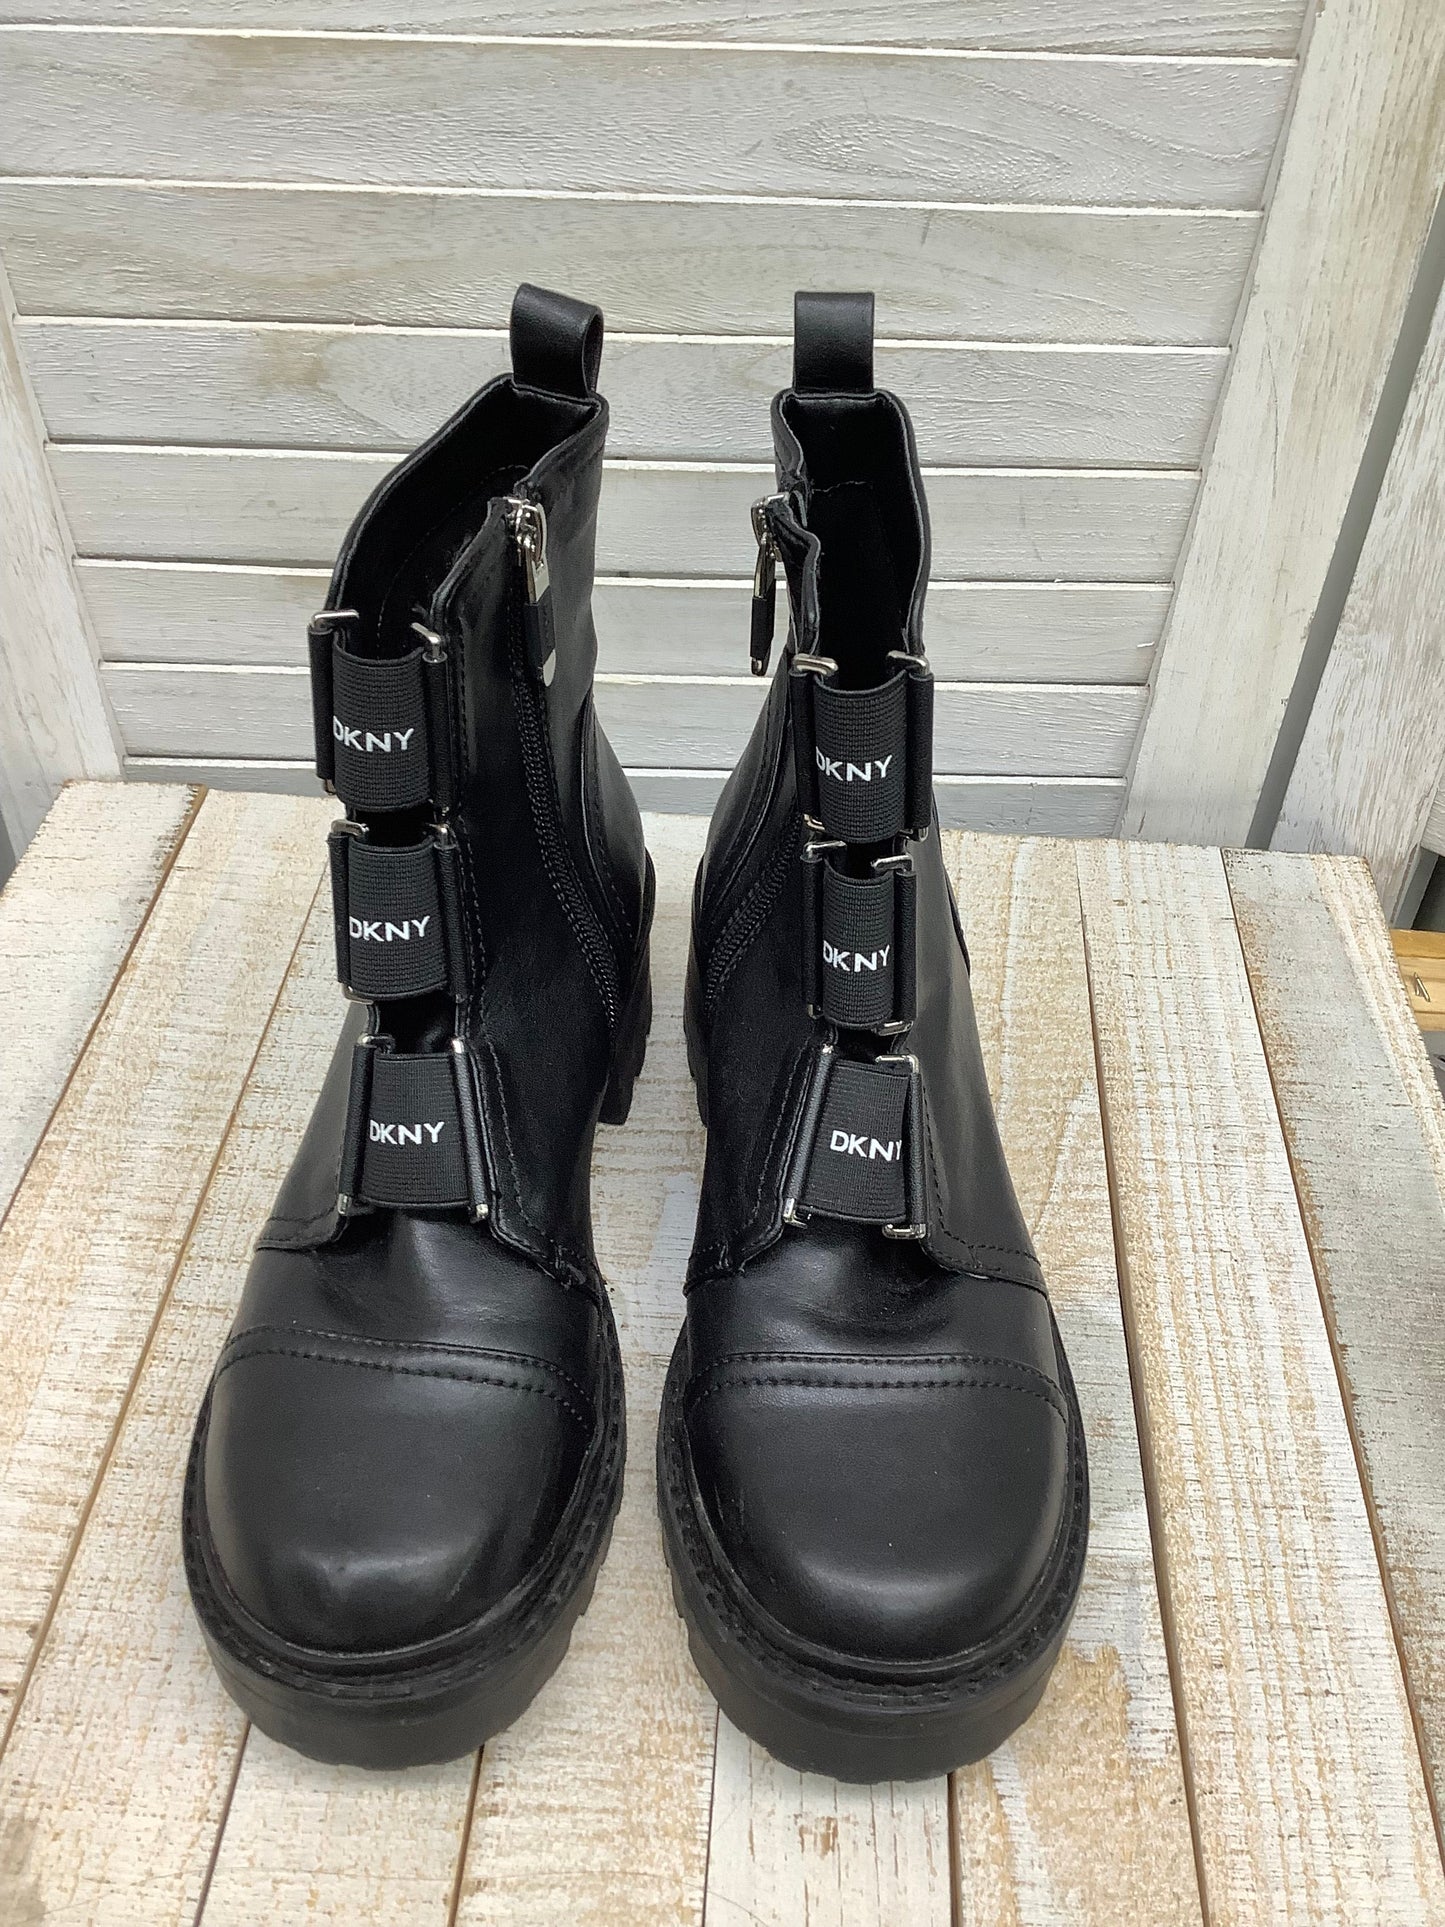 Boots Ankle Heels By Dkny  Size: 7.5